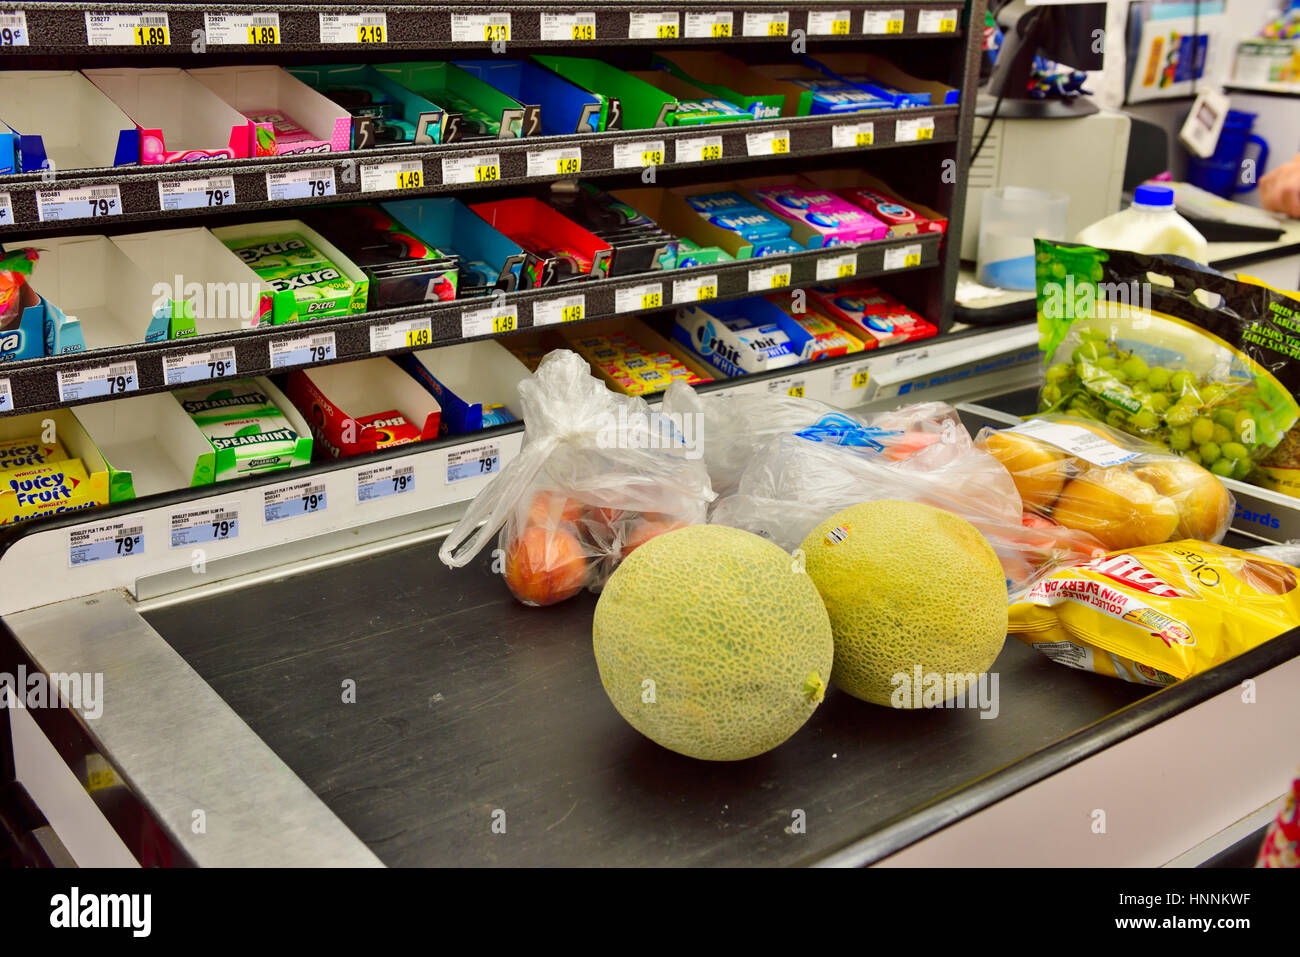 Produce on supermarket check out conveyor belt with impulse purchase check-out display Stock Photo